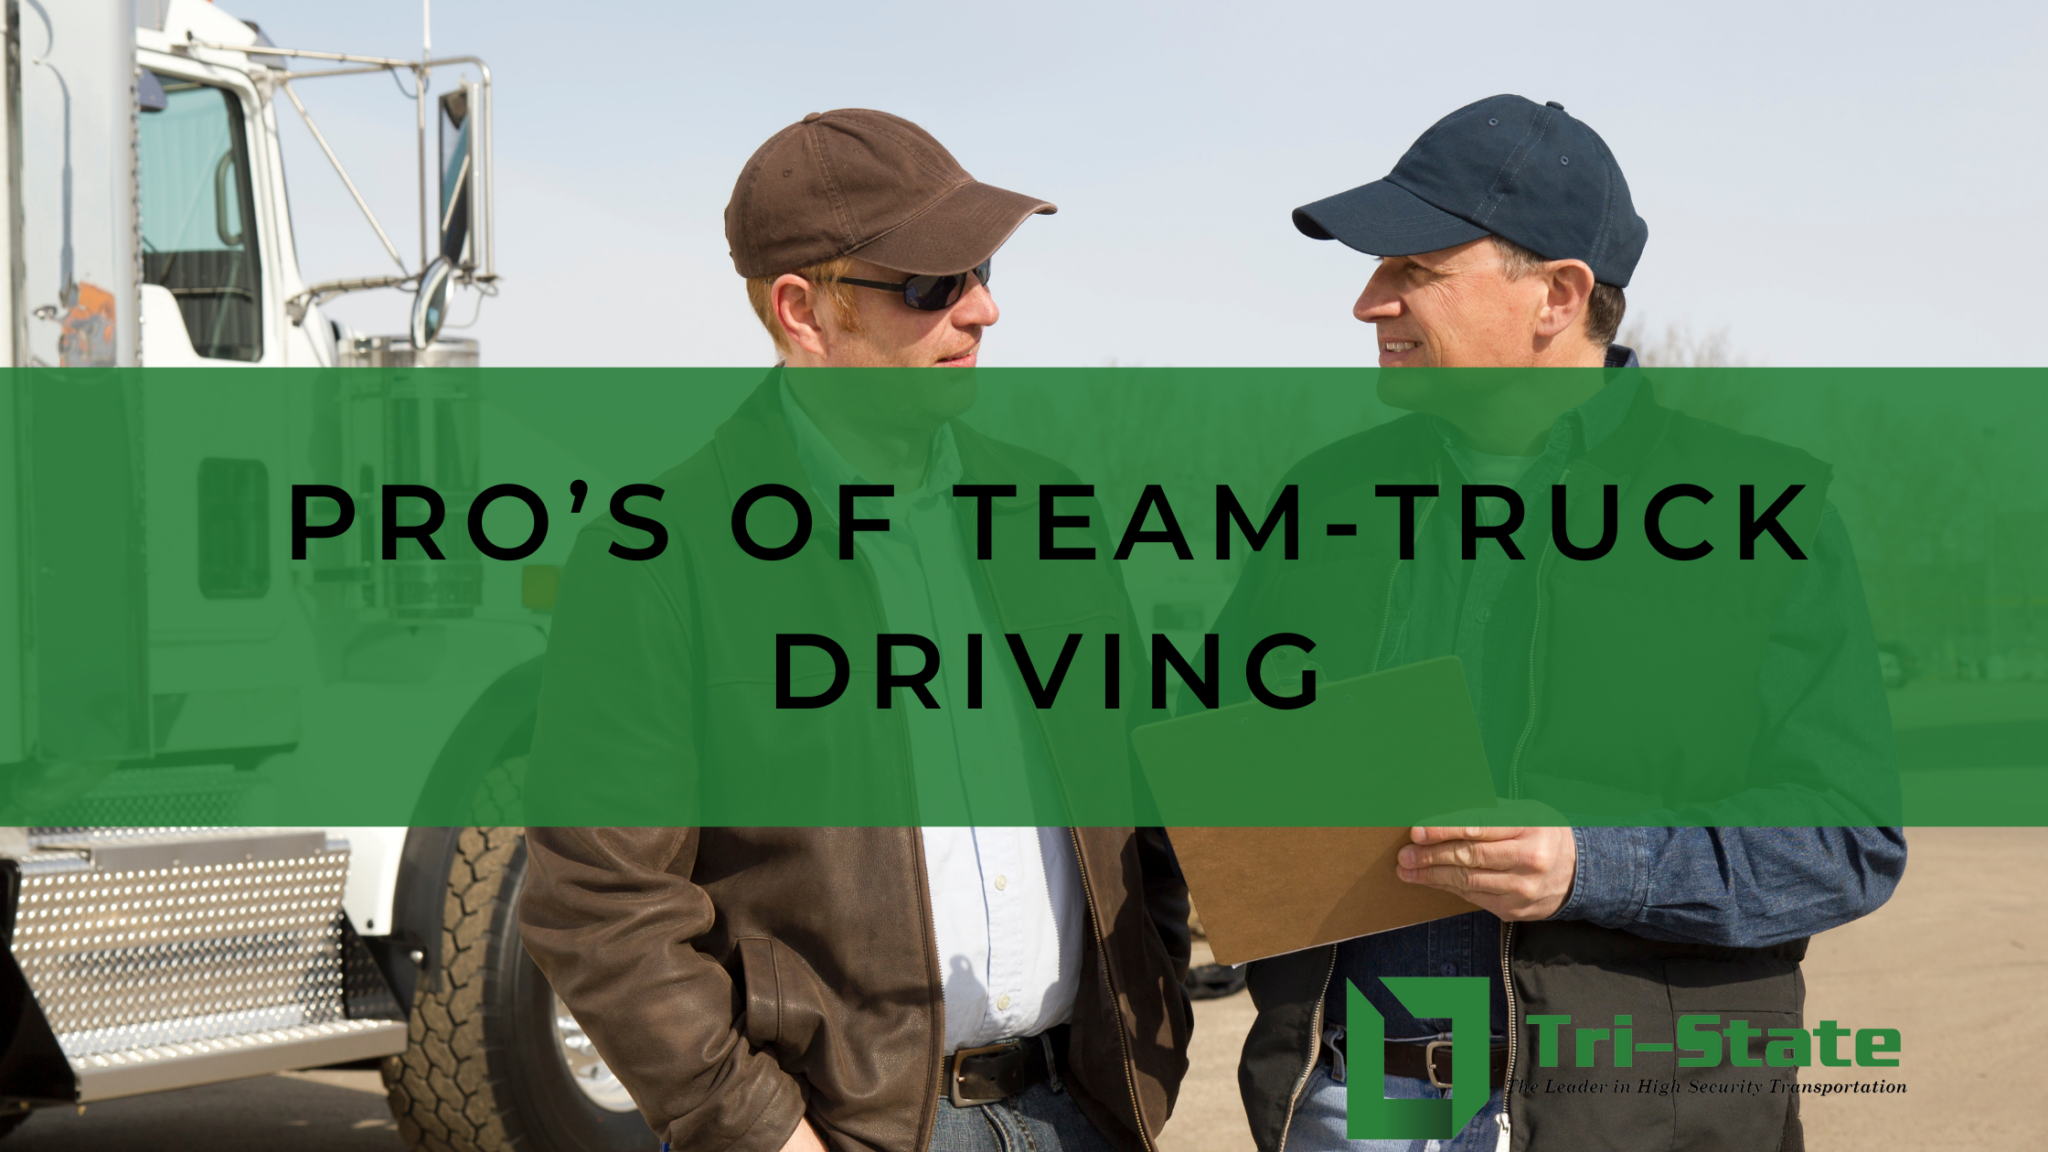 Pro’s of Team-Truck Driving